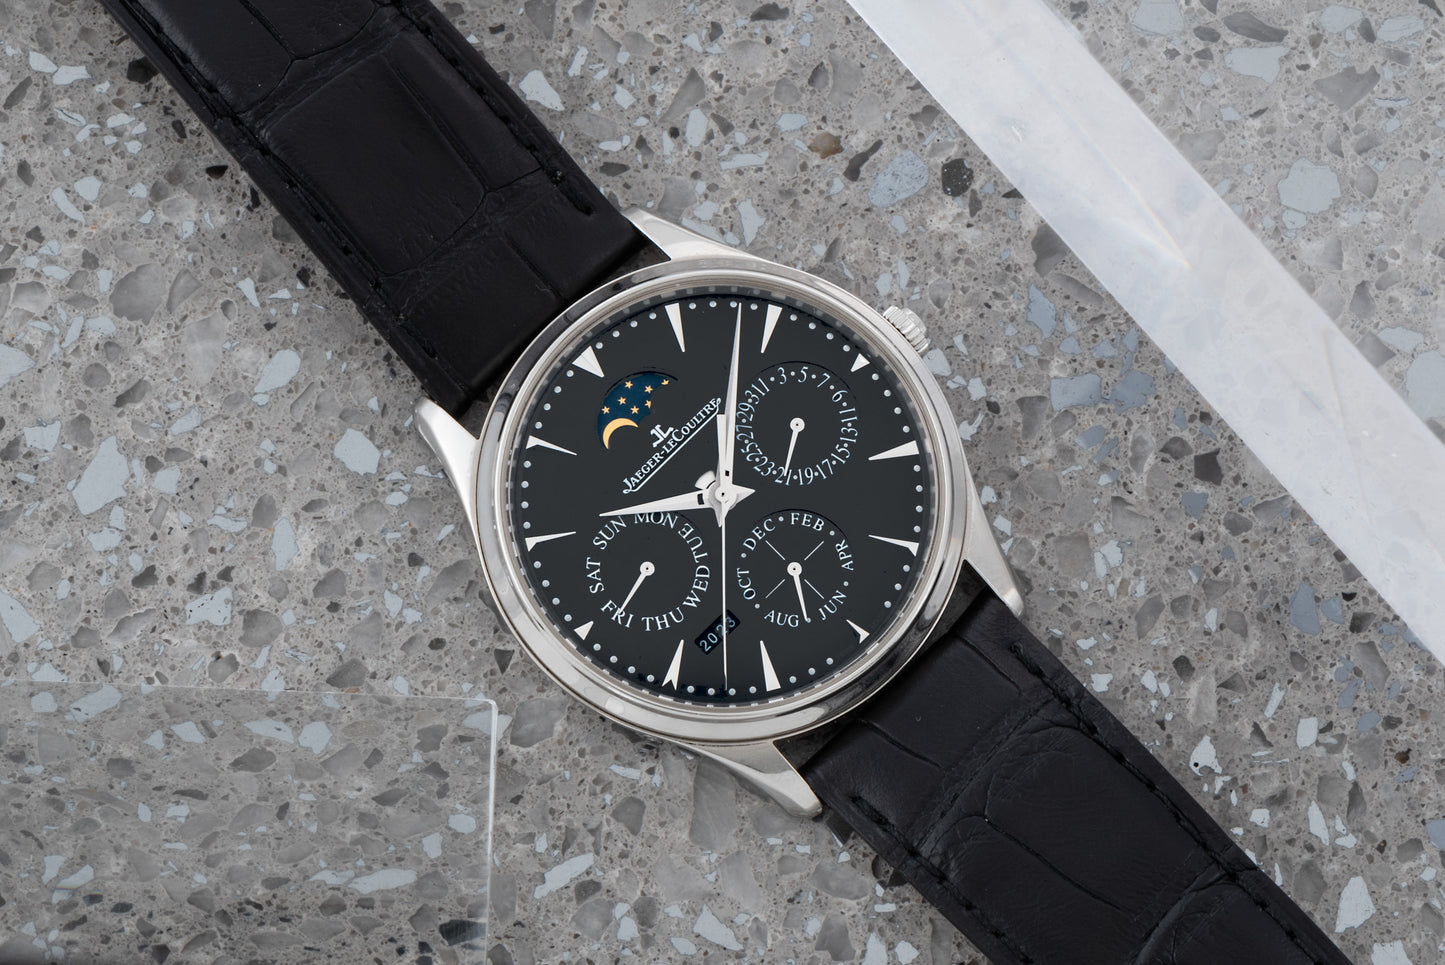 Jaeger-LeCoultre Master Ultra Thin Perpetual Calendar Moonphase